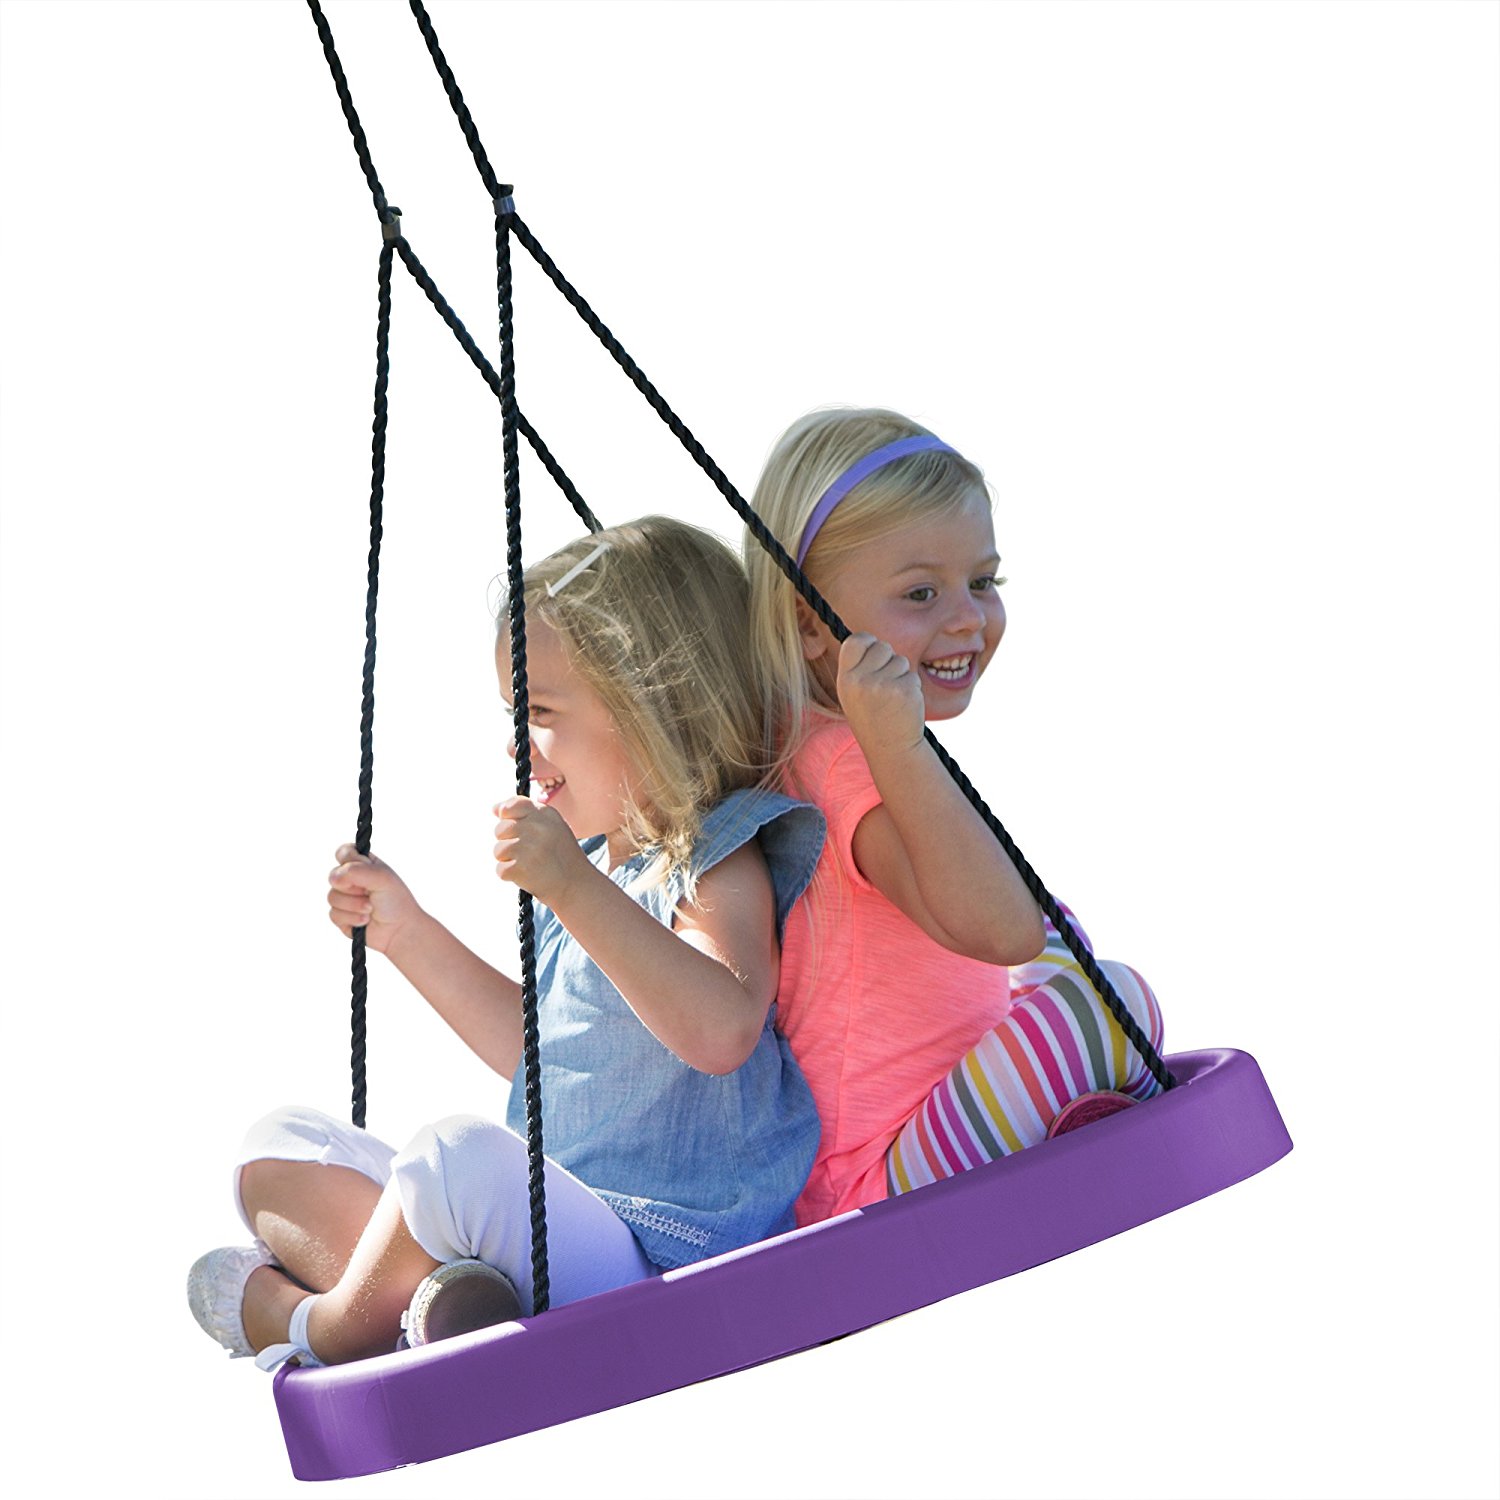 Amazon.com: Super Spinner Swing, FUN! Easy Install for Swing Set or ...